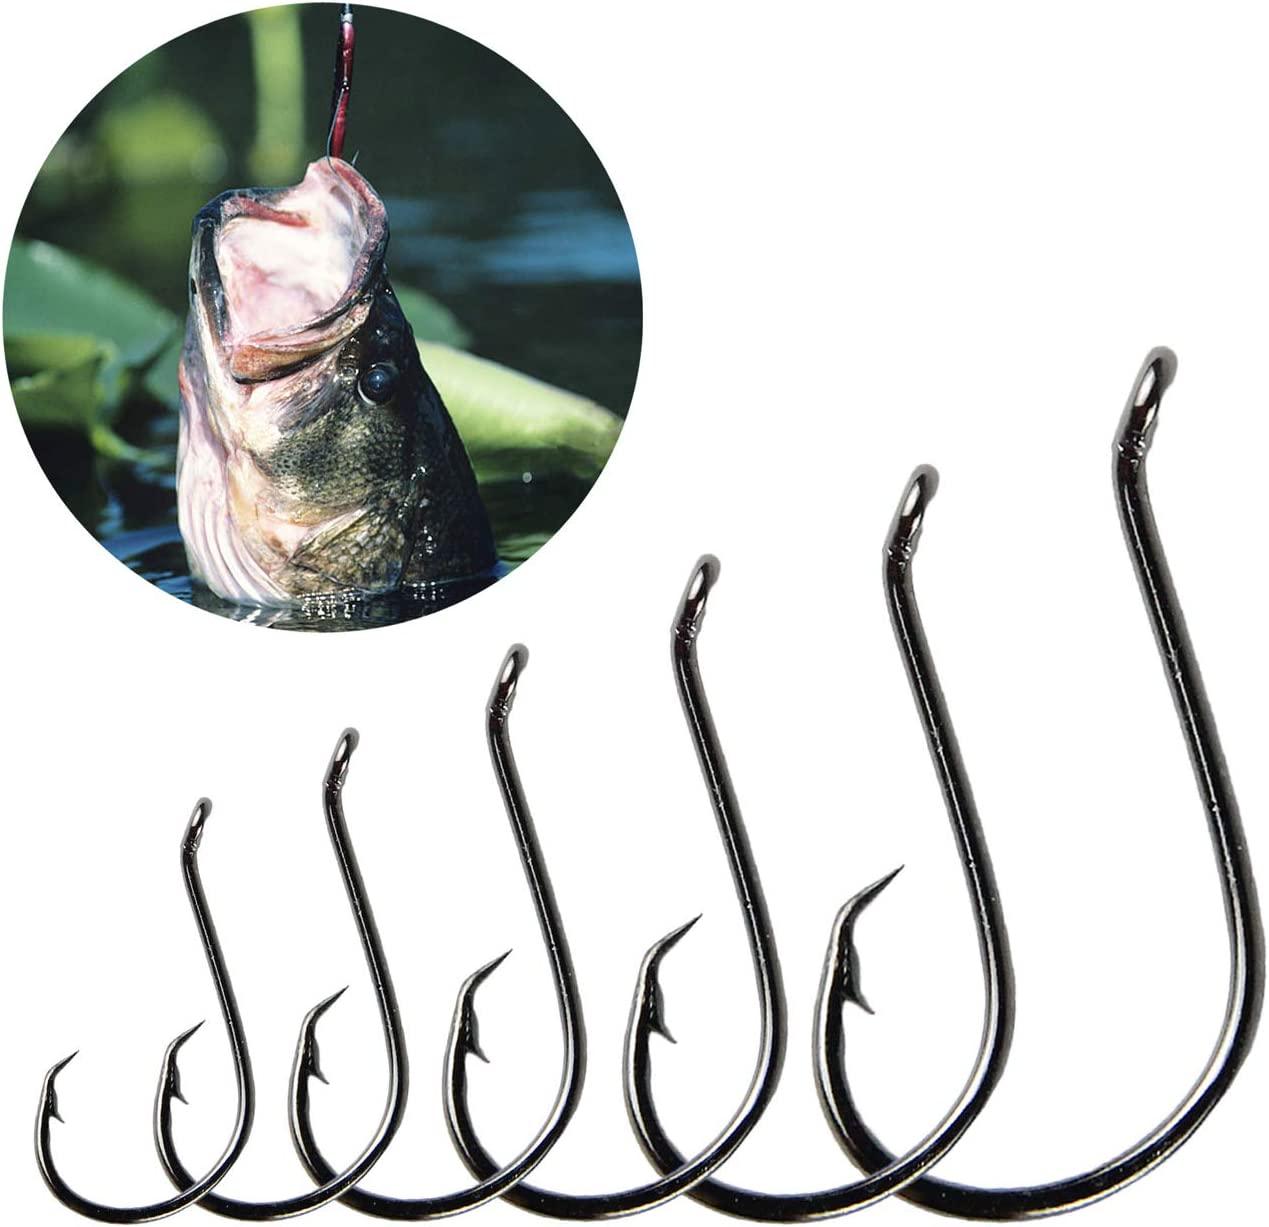 POETRYYI Size #1-15 High Carbon Steel Circle Owner Fishing Hooks Freshwater  Fishhook hole Strong carp fish tackle P30